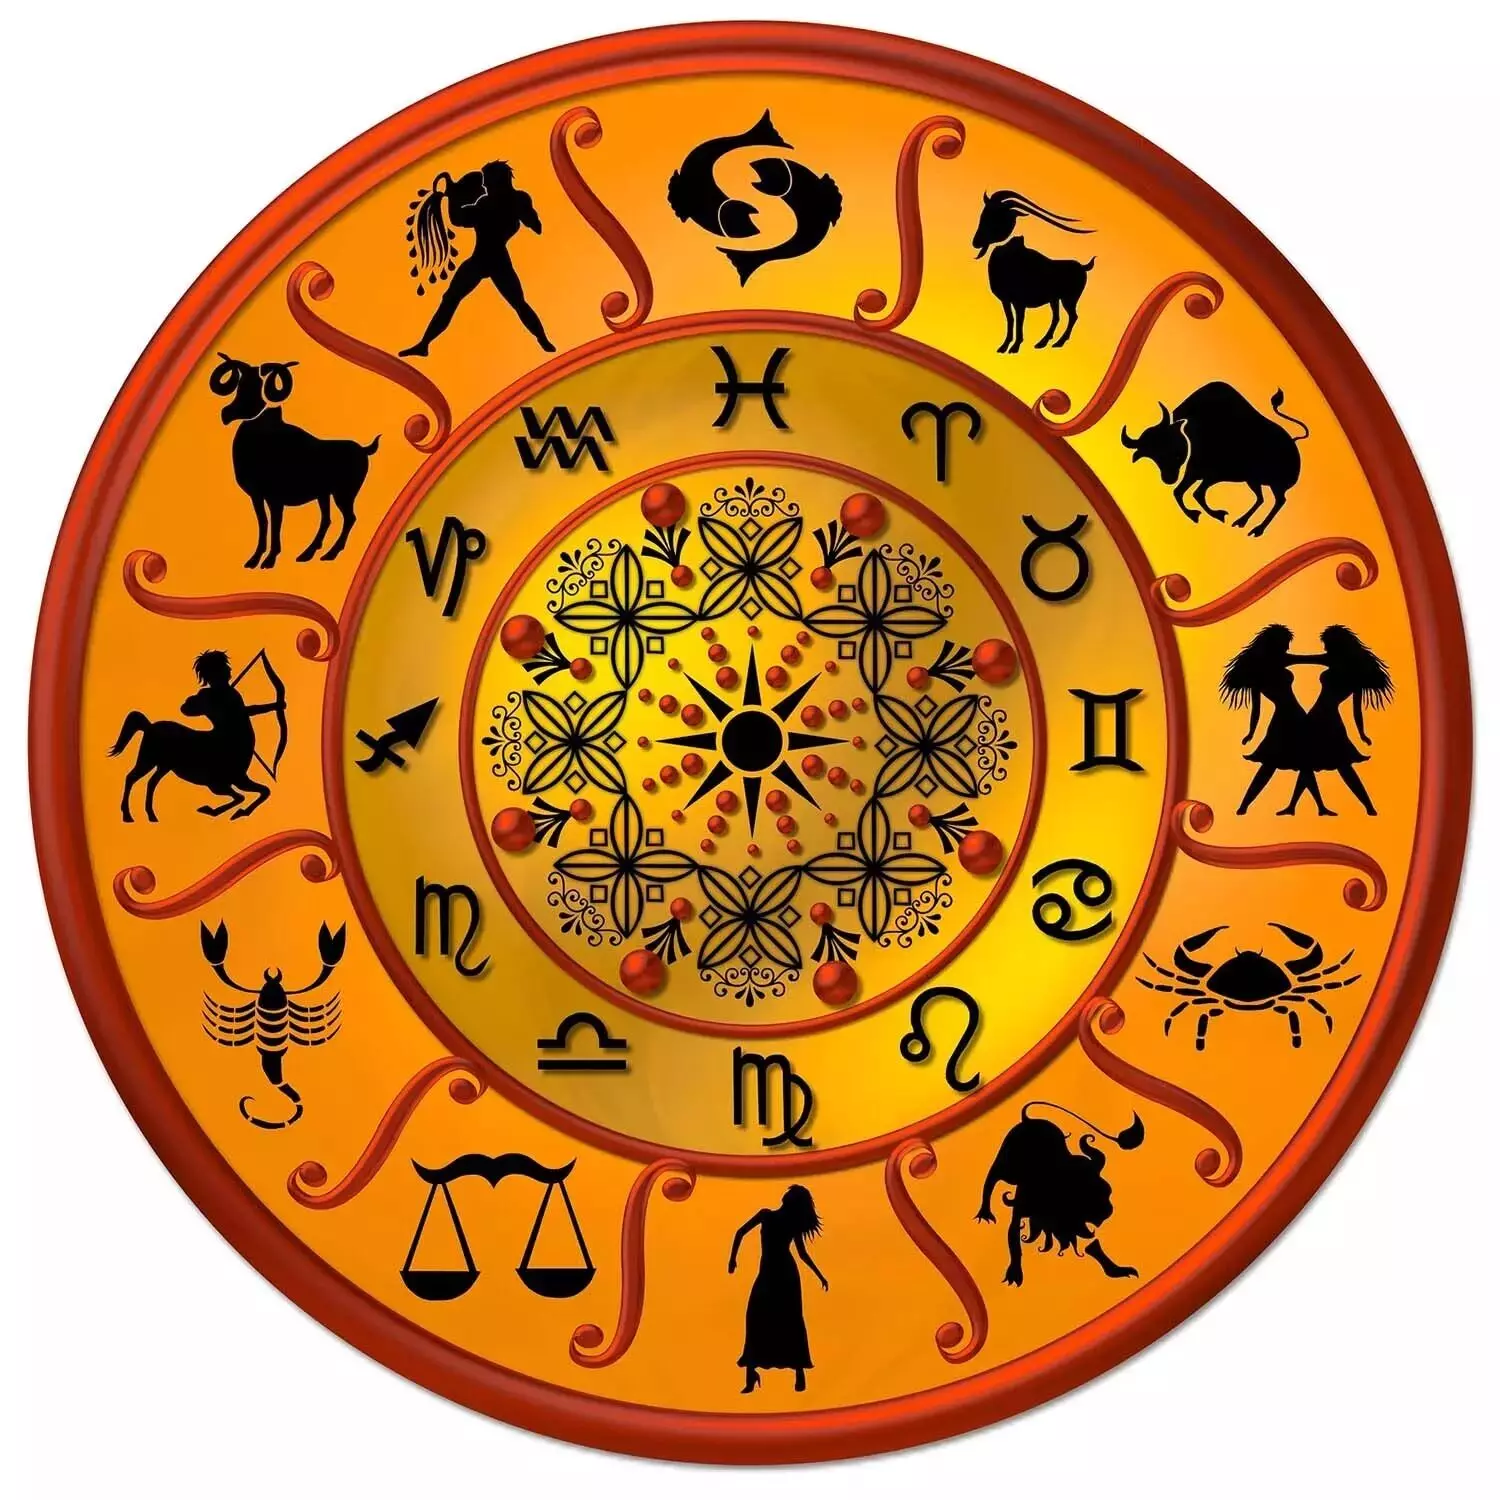 06 January   – Know your todays horoscope